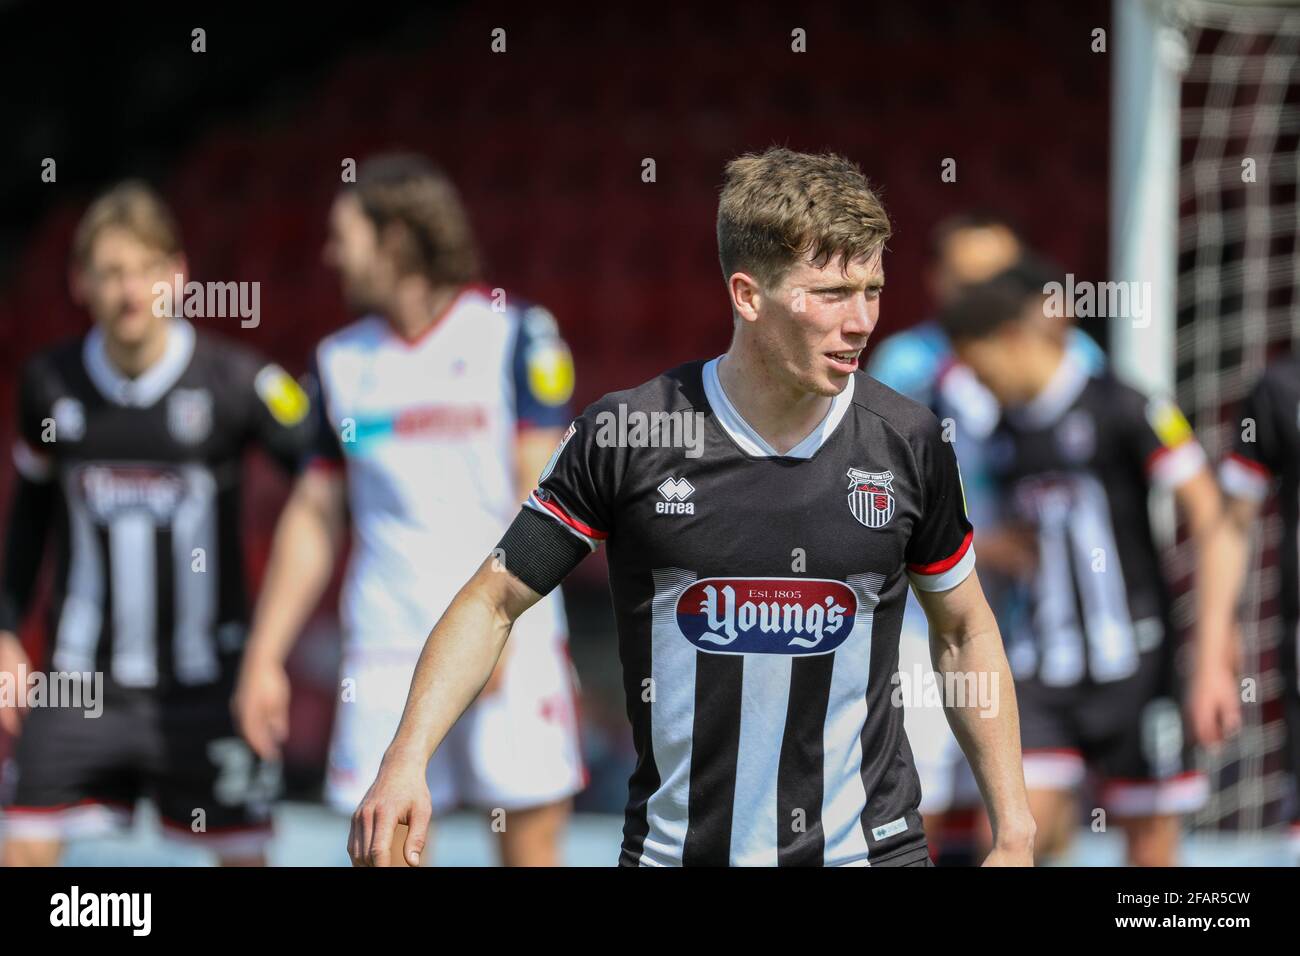 Grimsby Town midfielder Harry Clifton (15) during the Sky Bet League 2 match between Grimsby Town and Bolton Wanderers at Blundell Park, Cleethorpes, Stock Photo